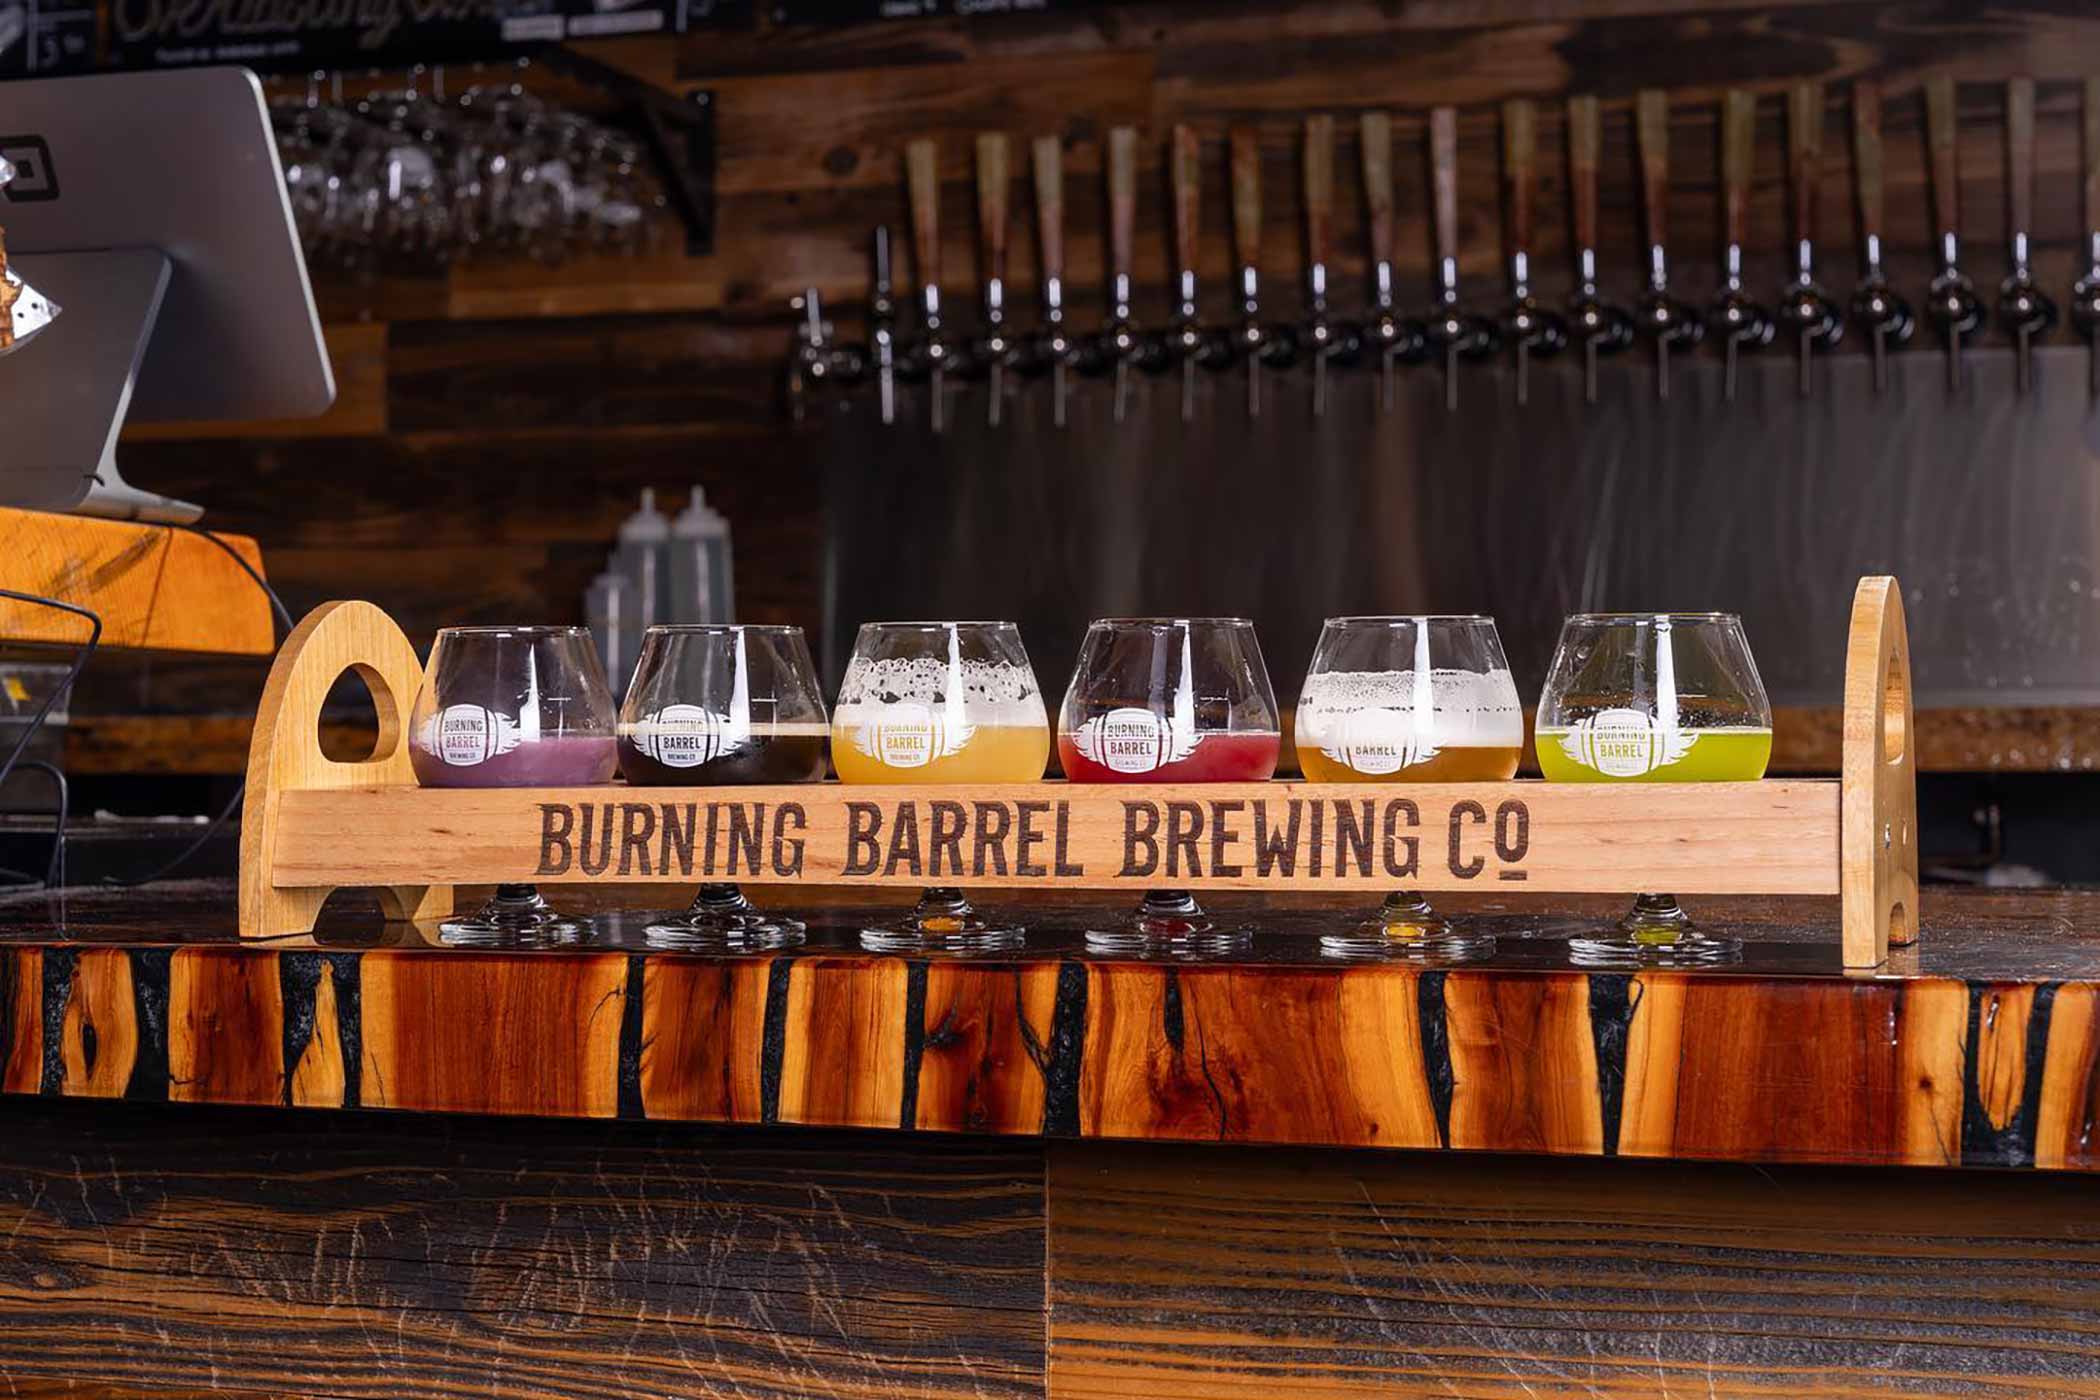 Burning Barrel Brewing:  Crazy Sours, Award-Winning Lagers, World’s Hottest Beer?